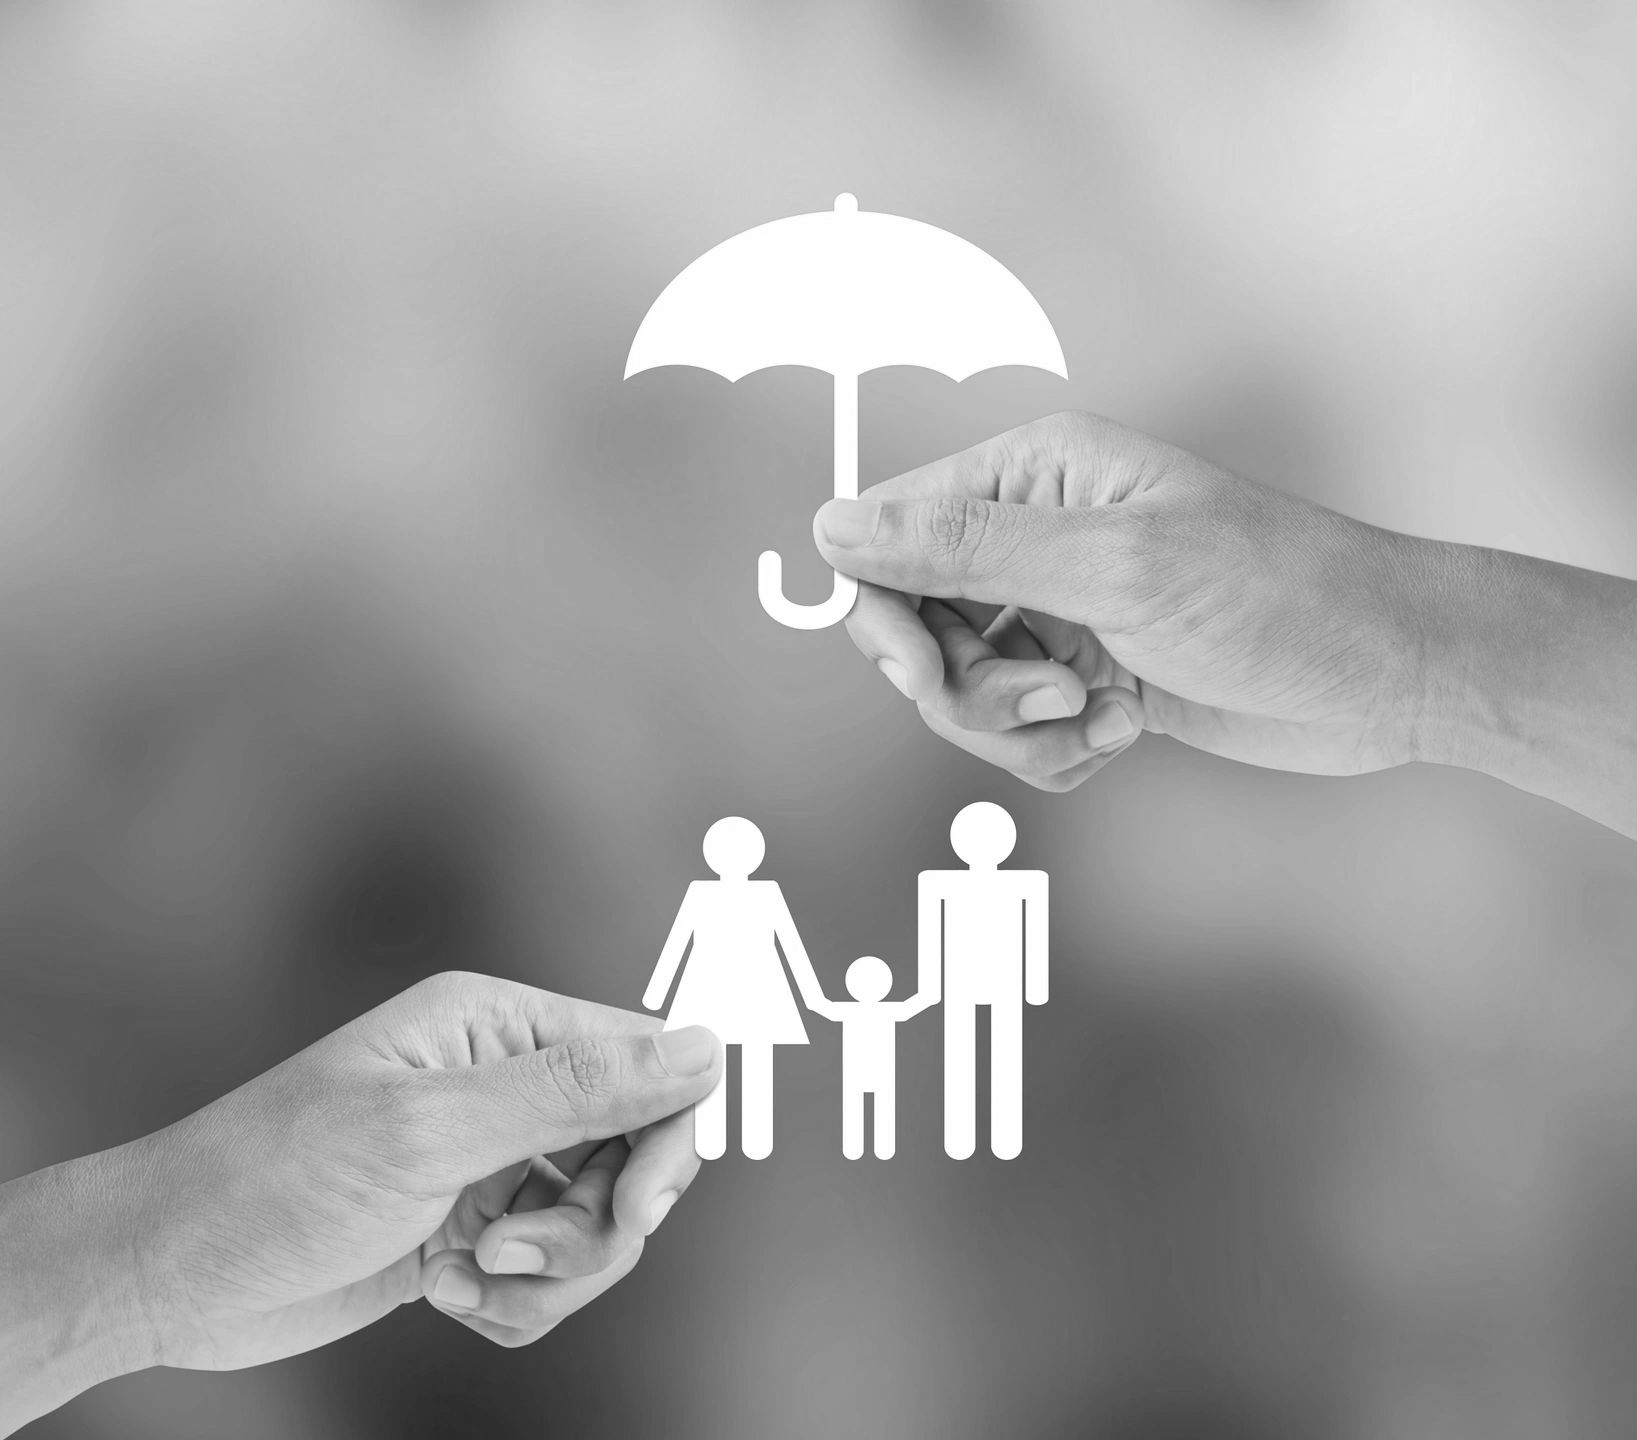 White umbrella held over family icon by hands.